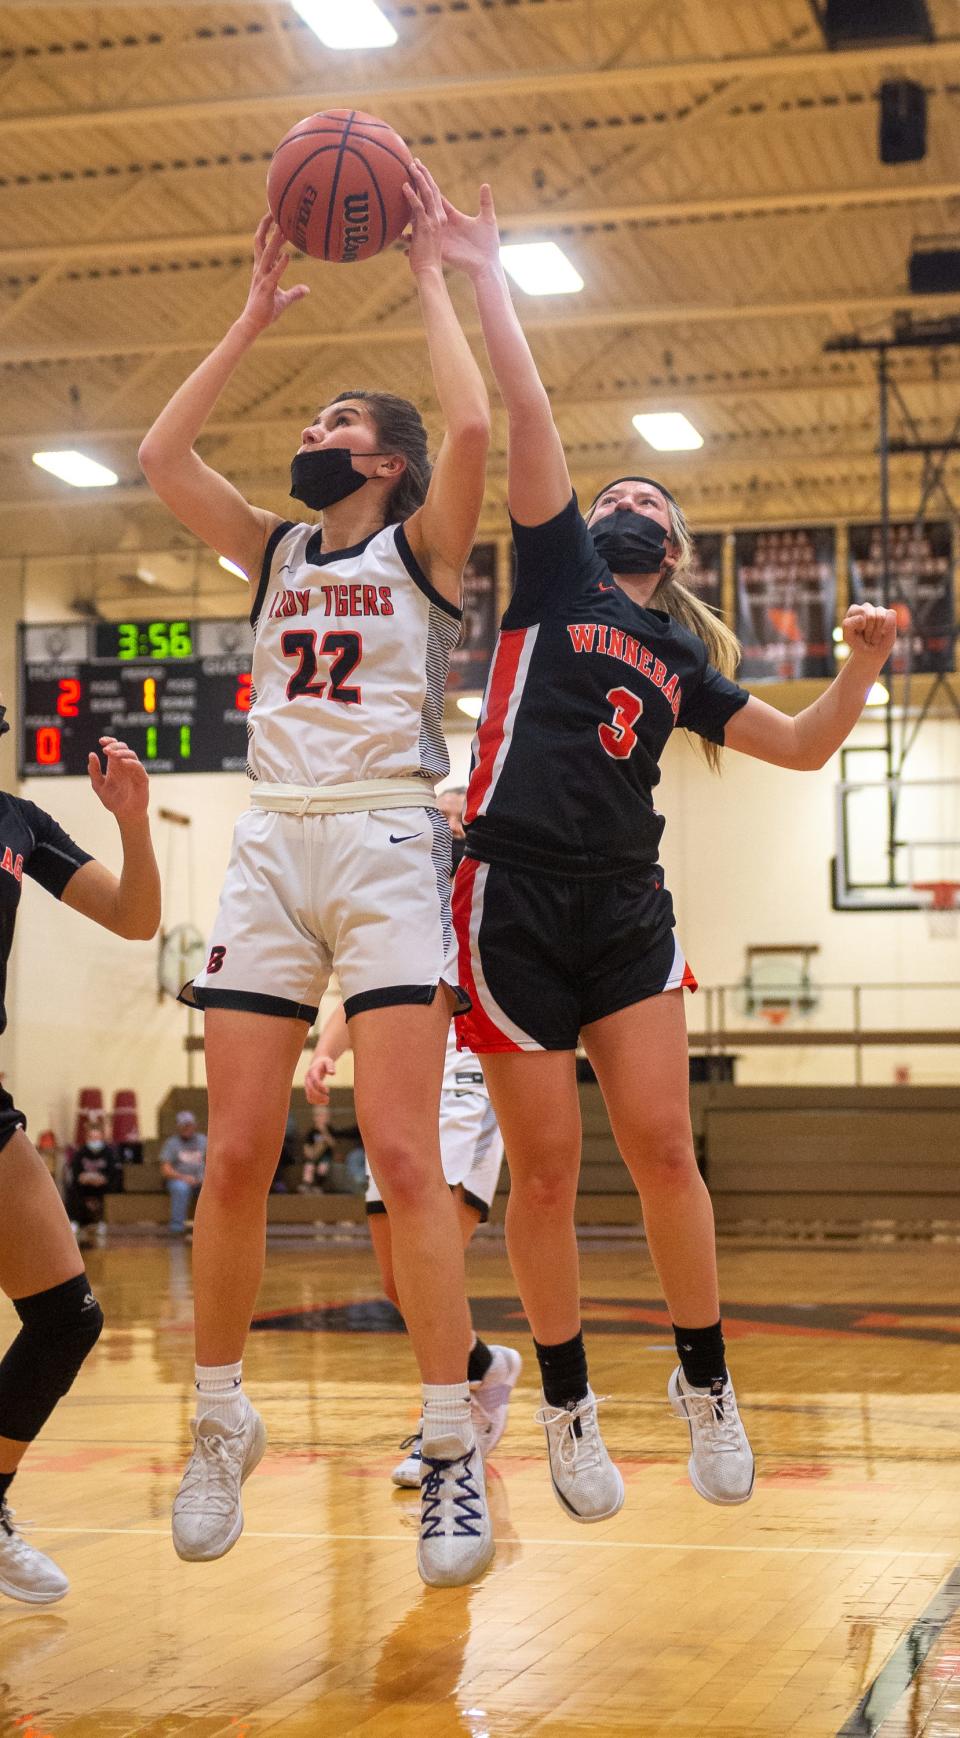 Winnebago's Annika Bielskis tries to block a shot by Byron's Ava Kultgren during the first quarter of their game on Wednesday, Jan. 19, 2022, in Byron.